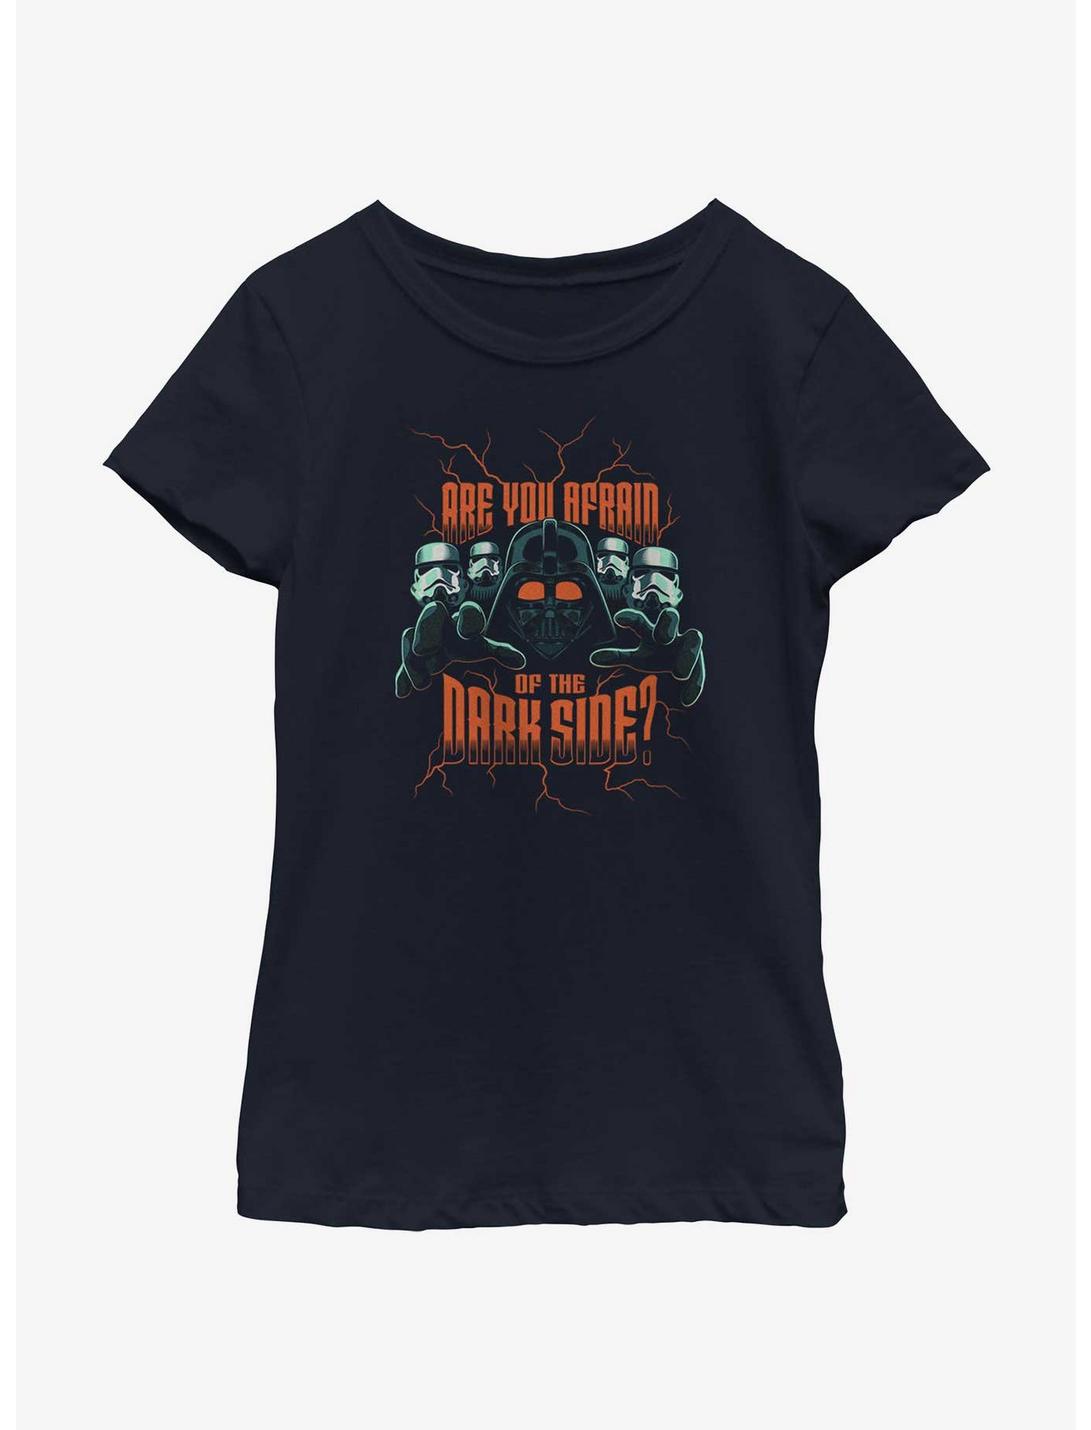 Star Wars Are You Afraid Of The Dark Side Youth Girls T-Shirt, NAVY, hi-res